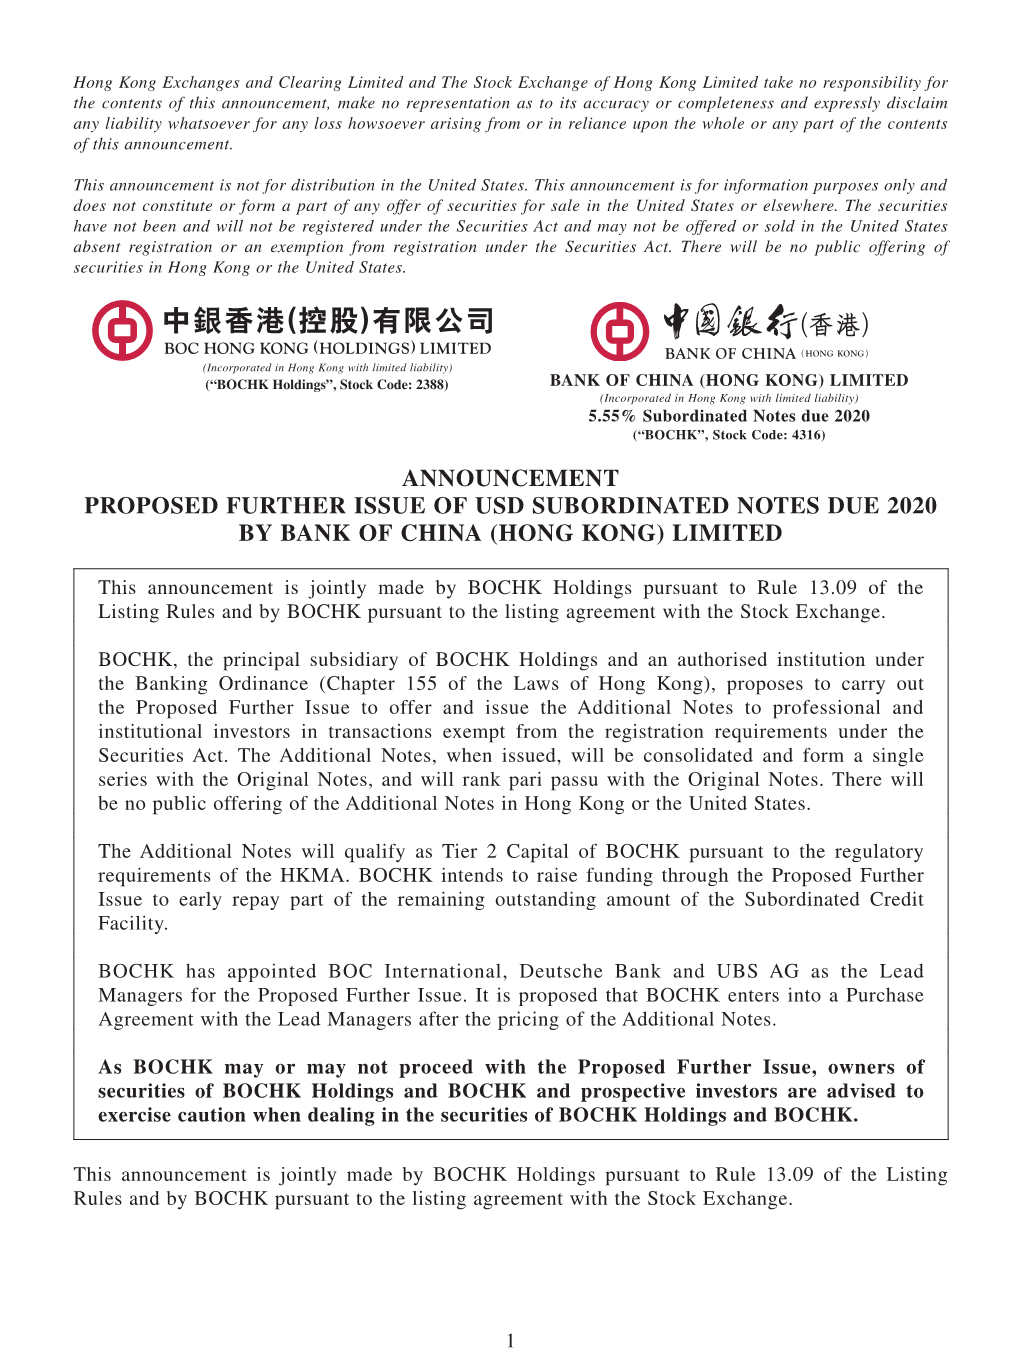 Proposed Further Issue of Usd Subordinated Notes Due 2020 by Bank of China (Hong Kong) Limited